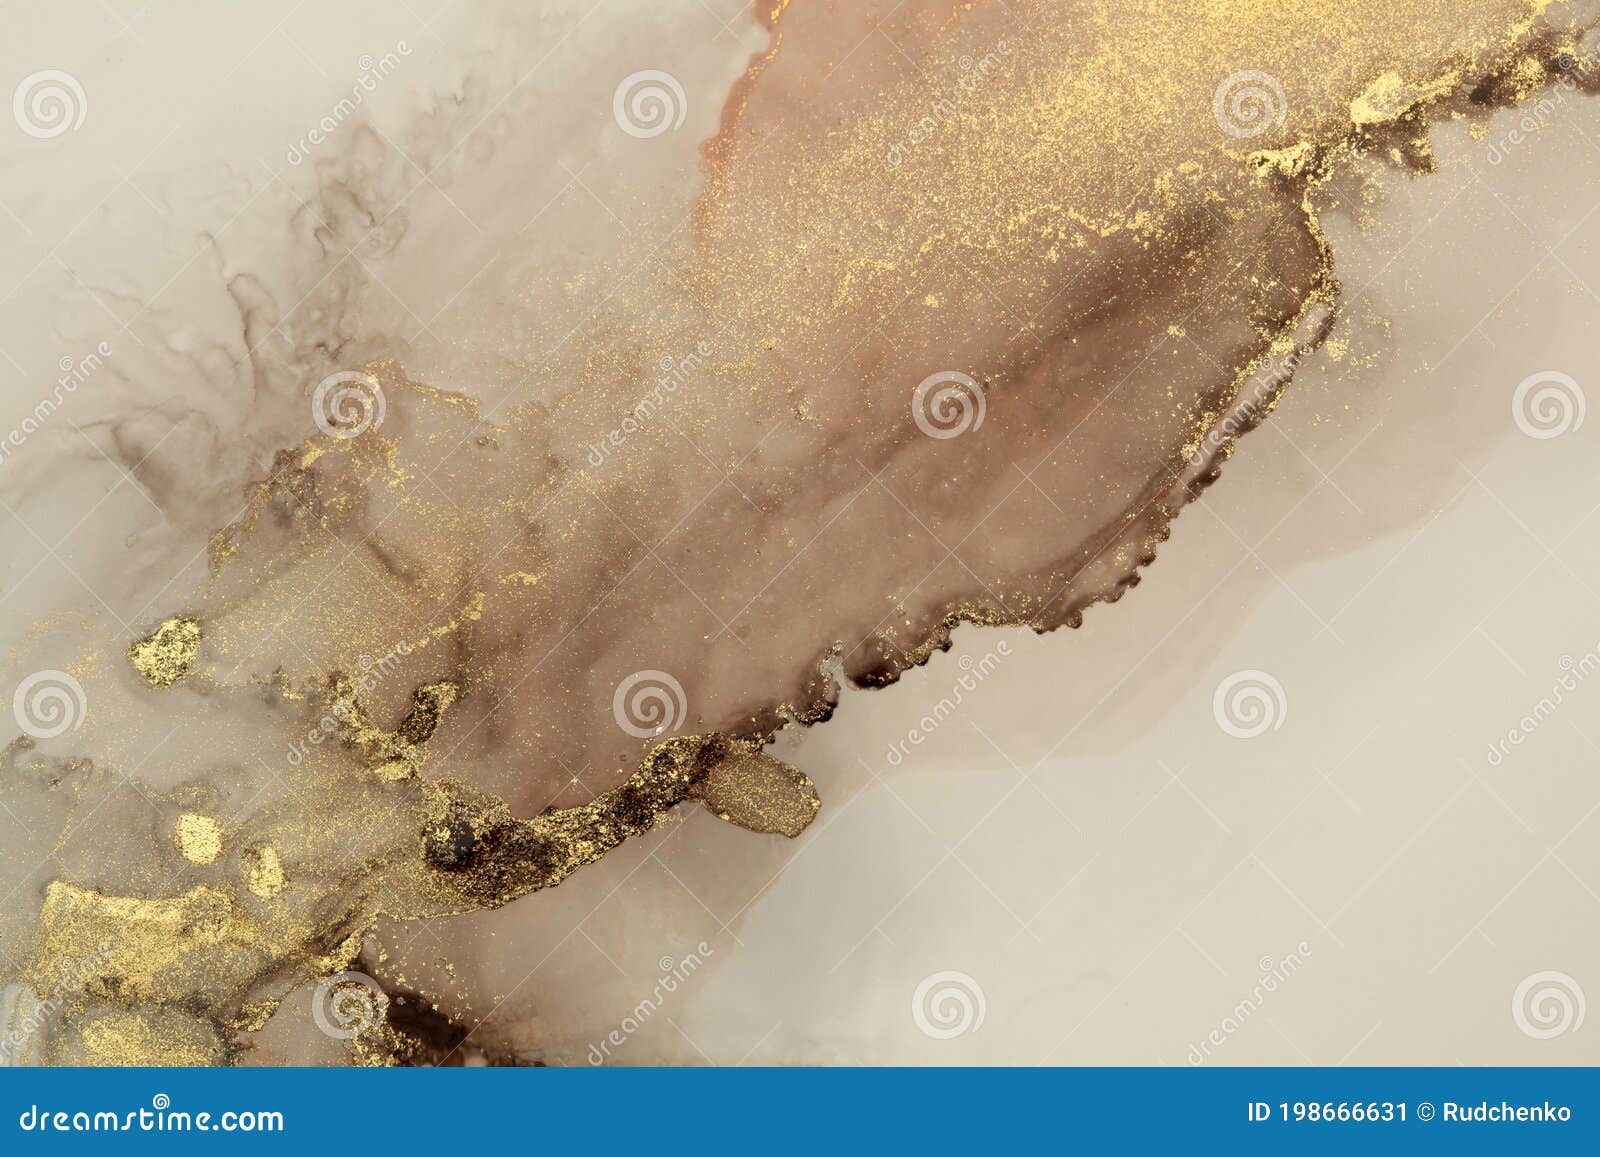 gold  abstract watercolor and acrylic flow blot painting. color canvas marble texture background. alcohol ink